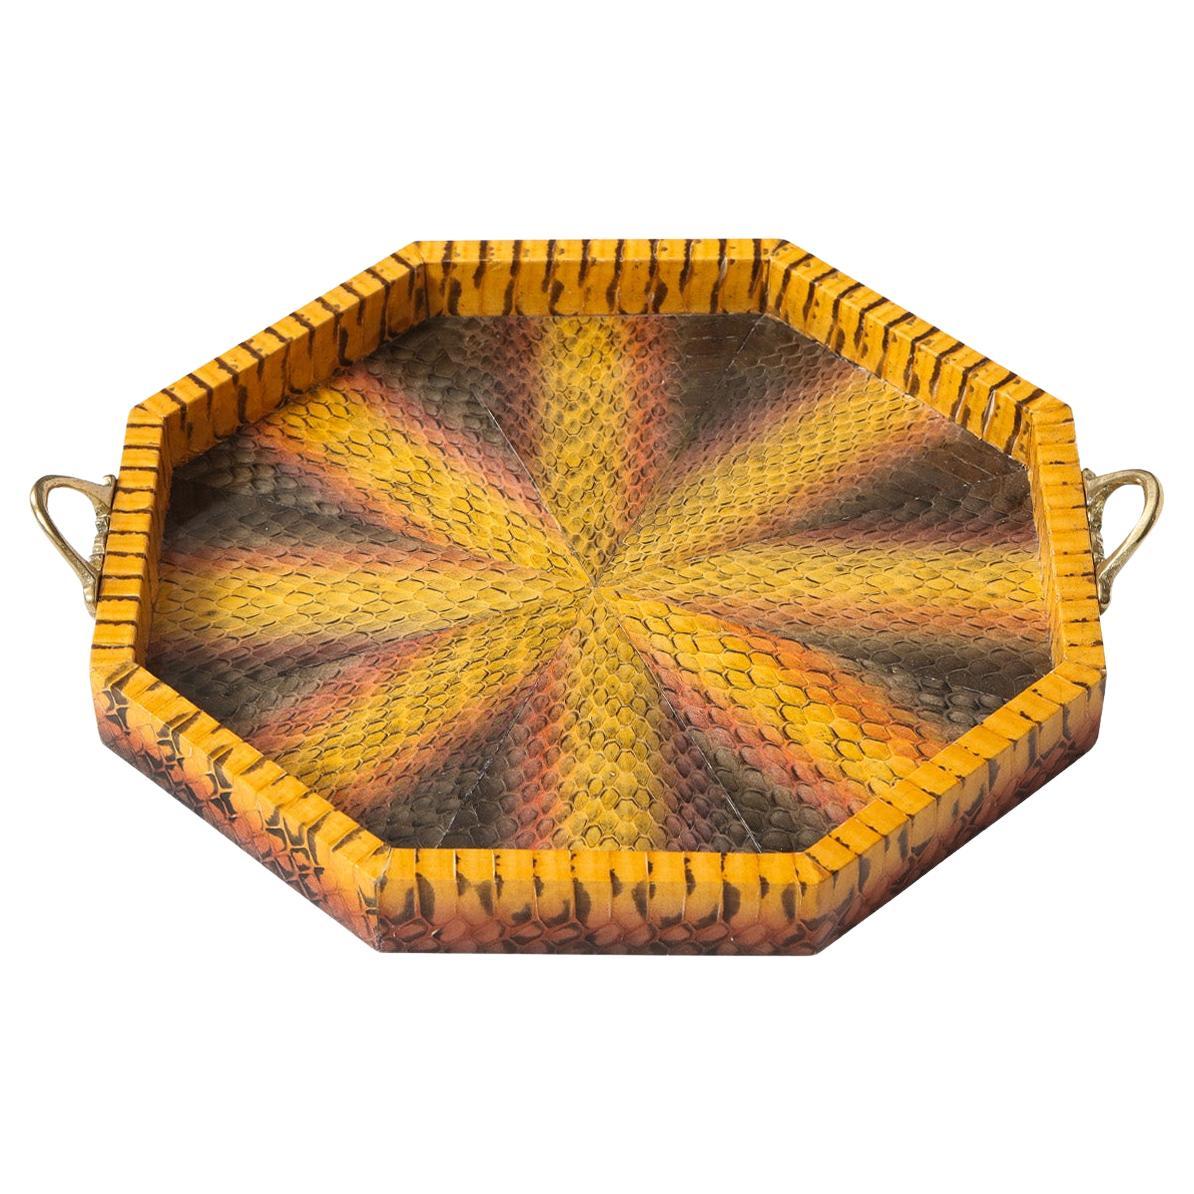 Lobel Originals Octagonal Tray in Plum, Gray and Sunflower Python, New For Sale